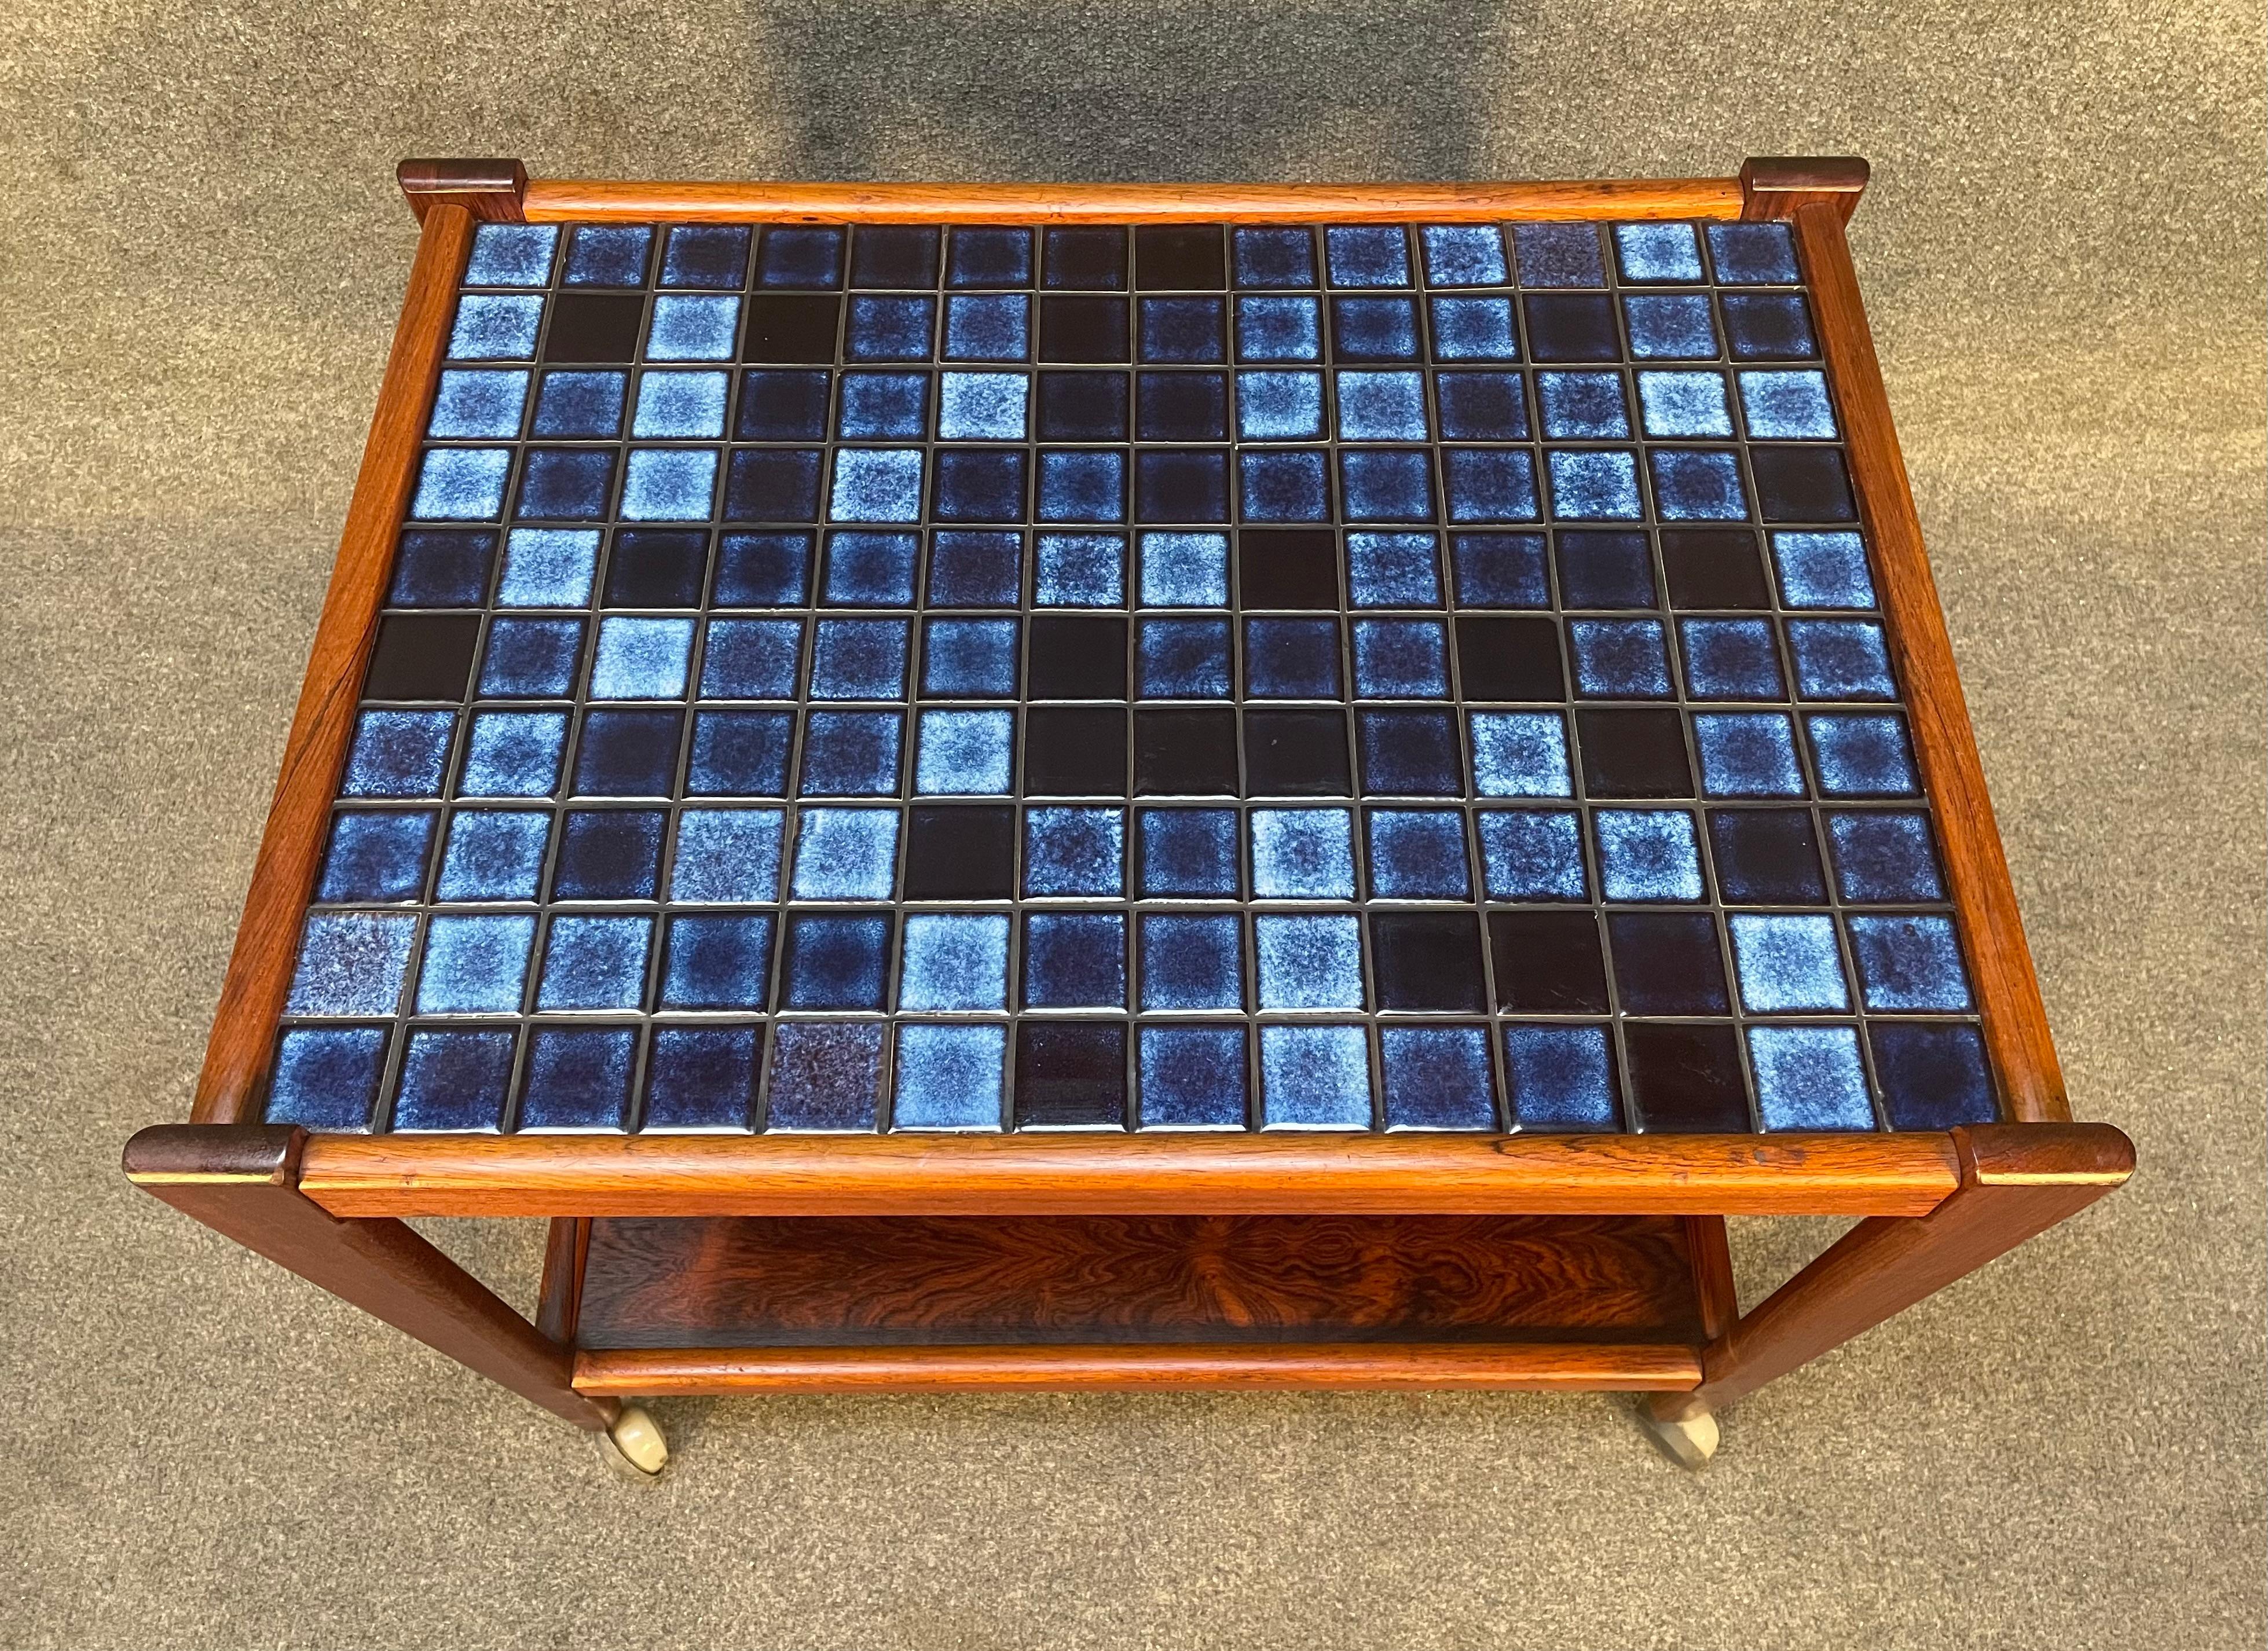 Here is a beautiful scandinavian modern bar cart in Brazilian rosewood manufactured in Denmark in the 1960's.
This exquisite piece, recently imported from Europe to California, features a top inlayed with blue tiles of different shades, a lower